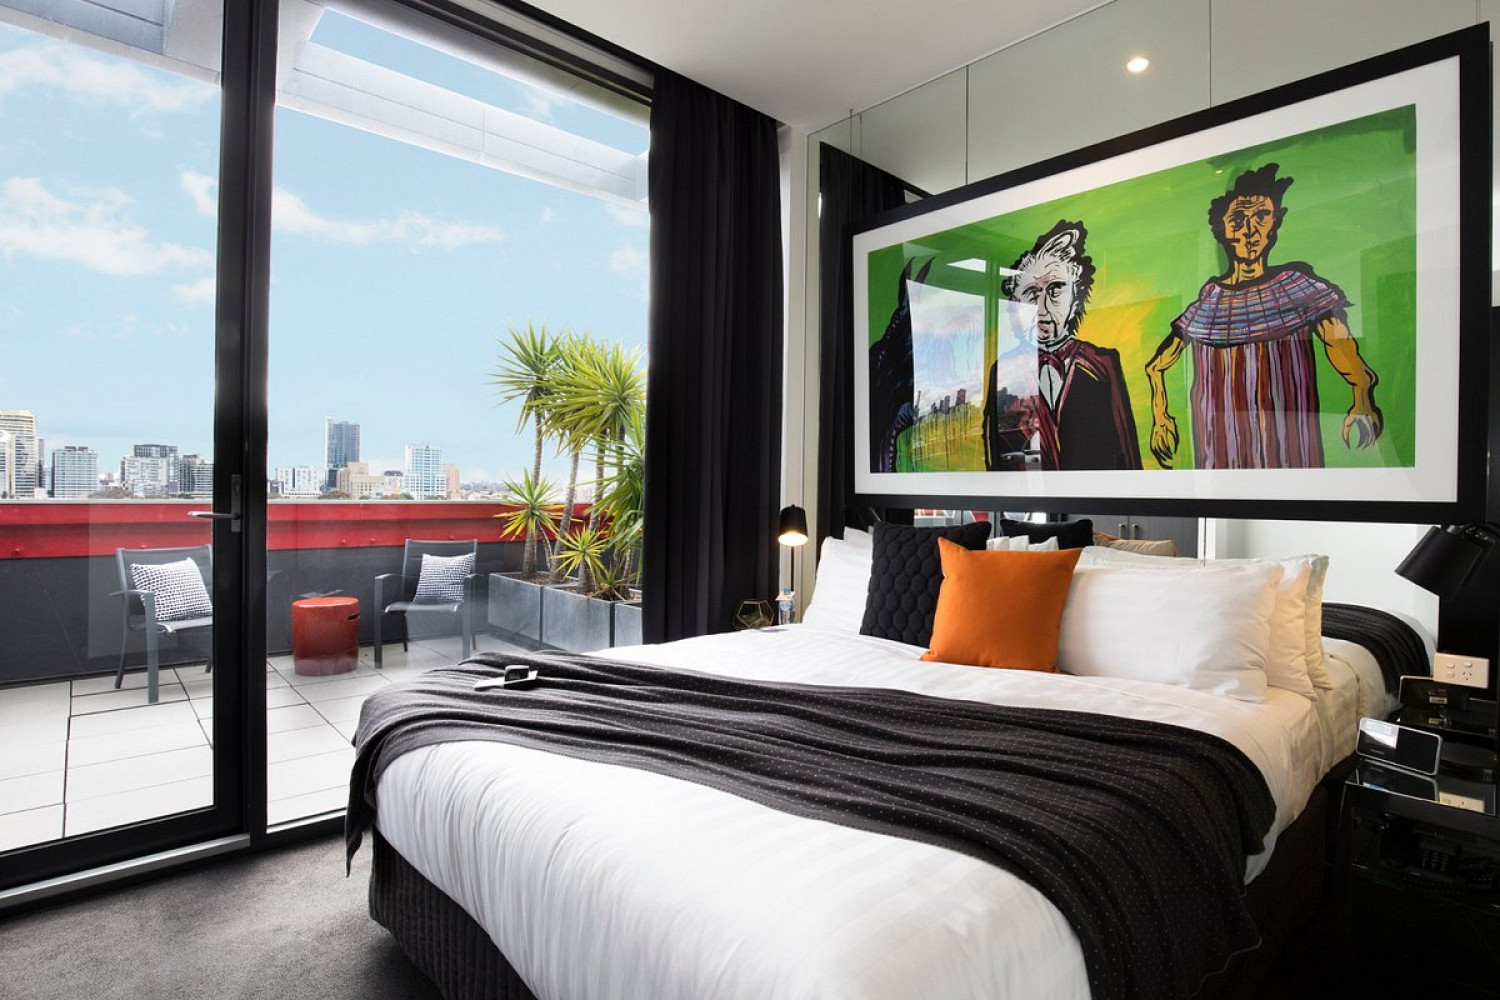 The hotel group Art Series has a number of hotels across Australian dedicated to major Australian artists. Pictured is 